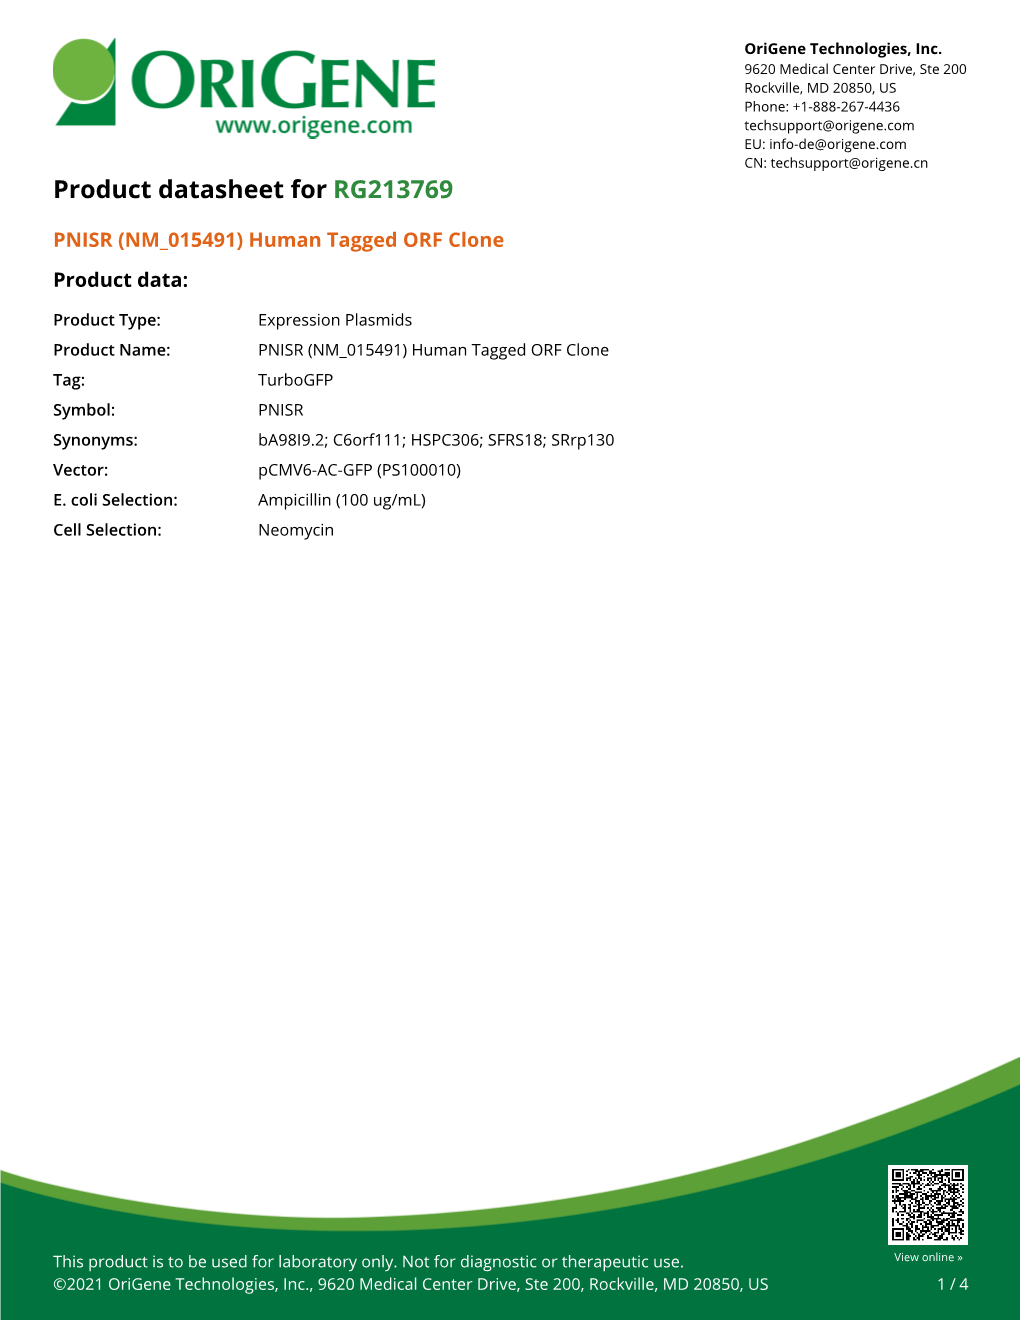 PNISR (NM 015491) Human Tagged ORF Clone Product Data